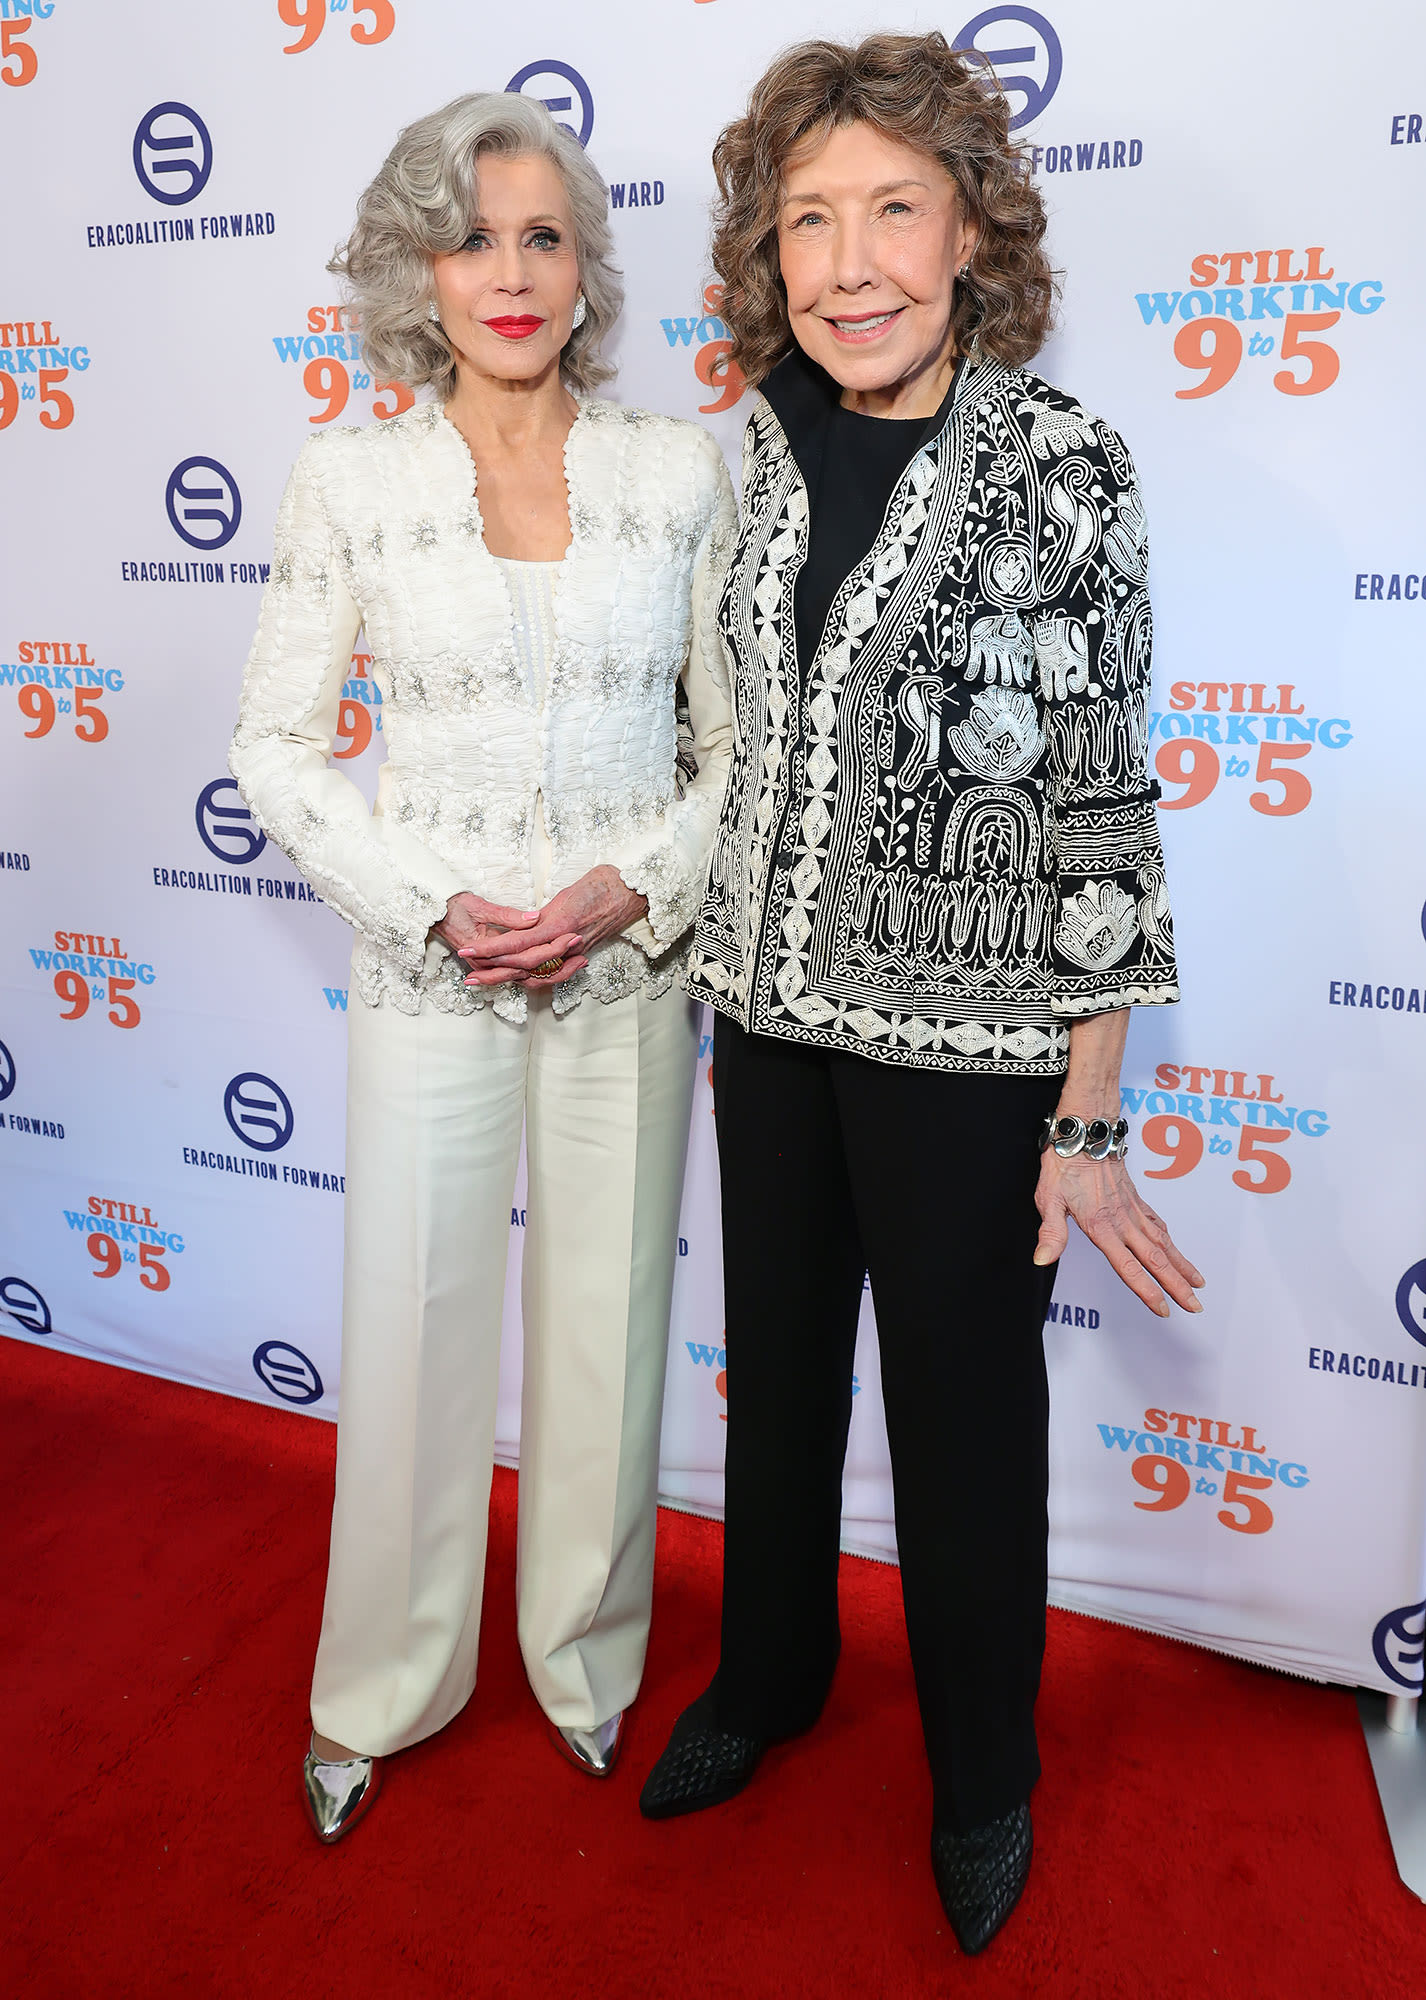 Jane Fonda and Lily Tomlin Show Their Support for Jennifer Aniston’s ‘9 to 5’ Remake: ‘Good Luck’